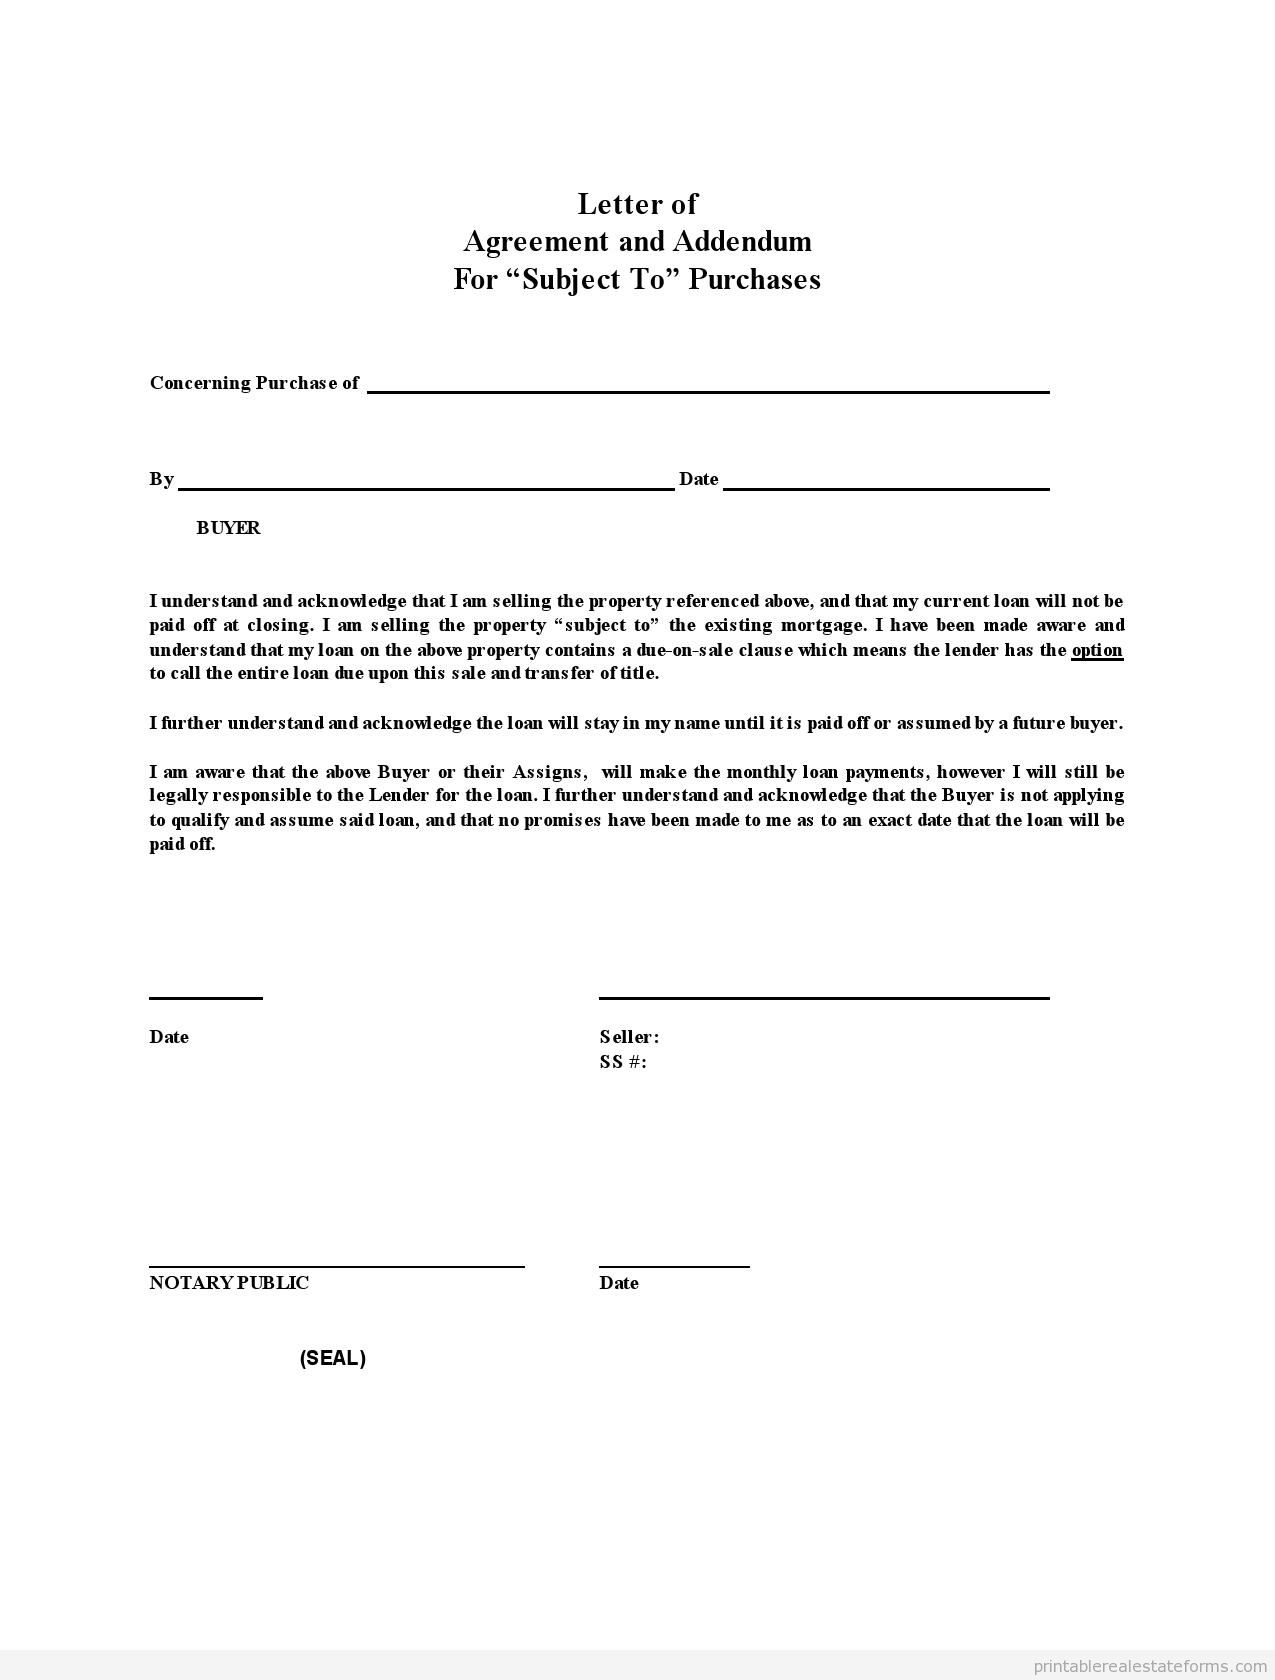 Free Printable Letter of Agreement Form (GENERIC)